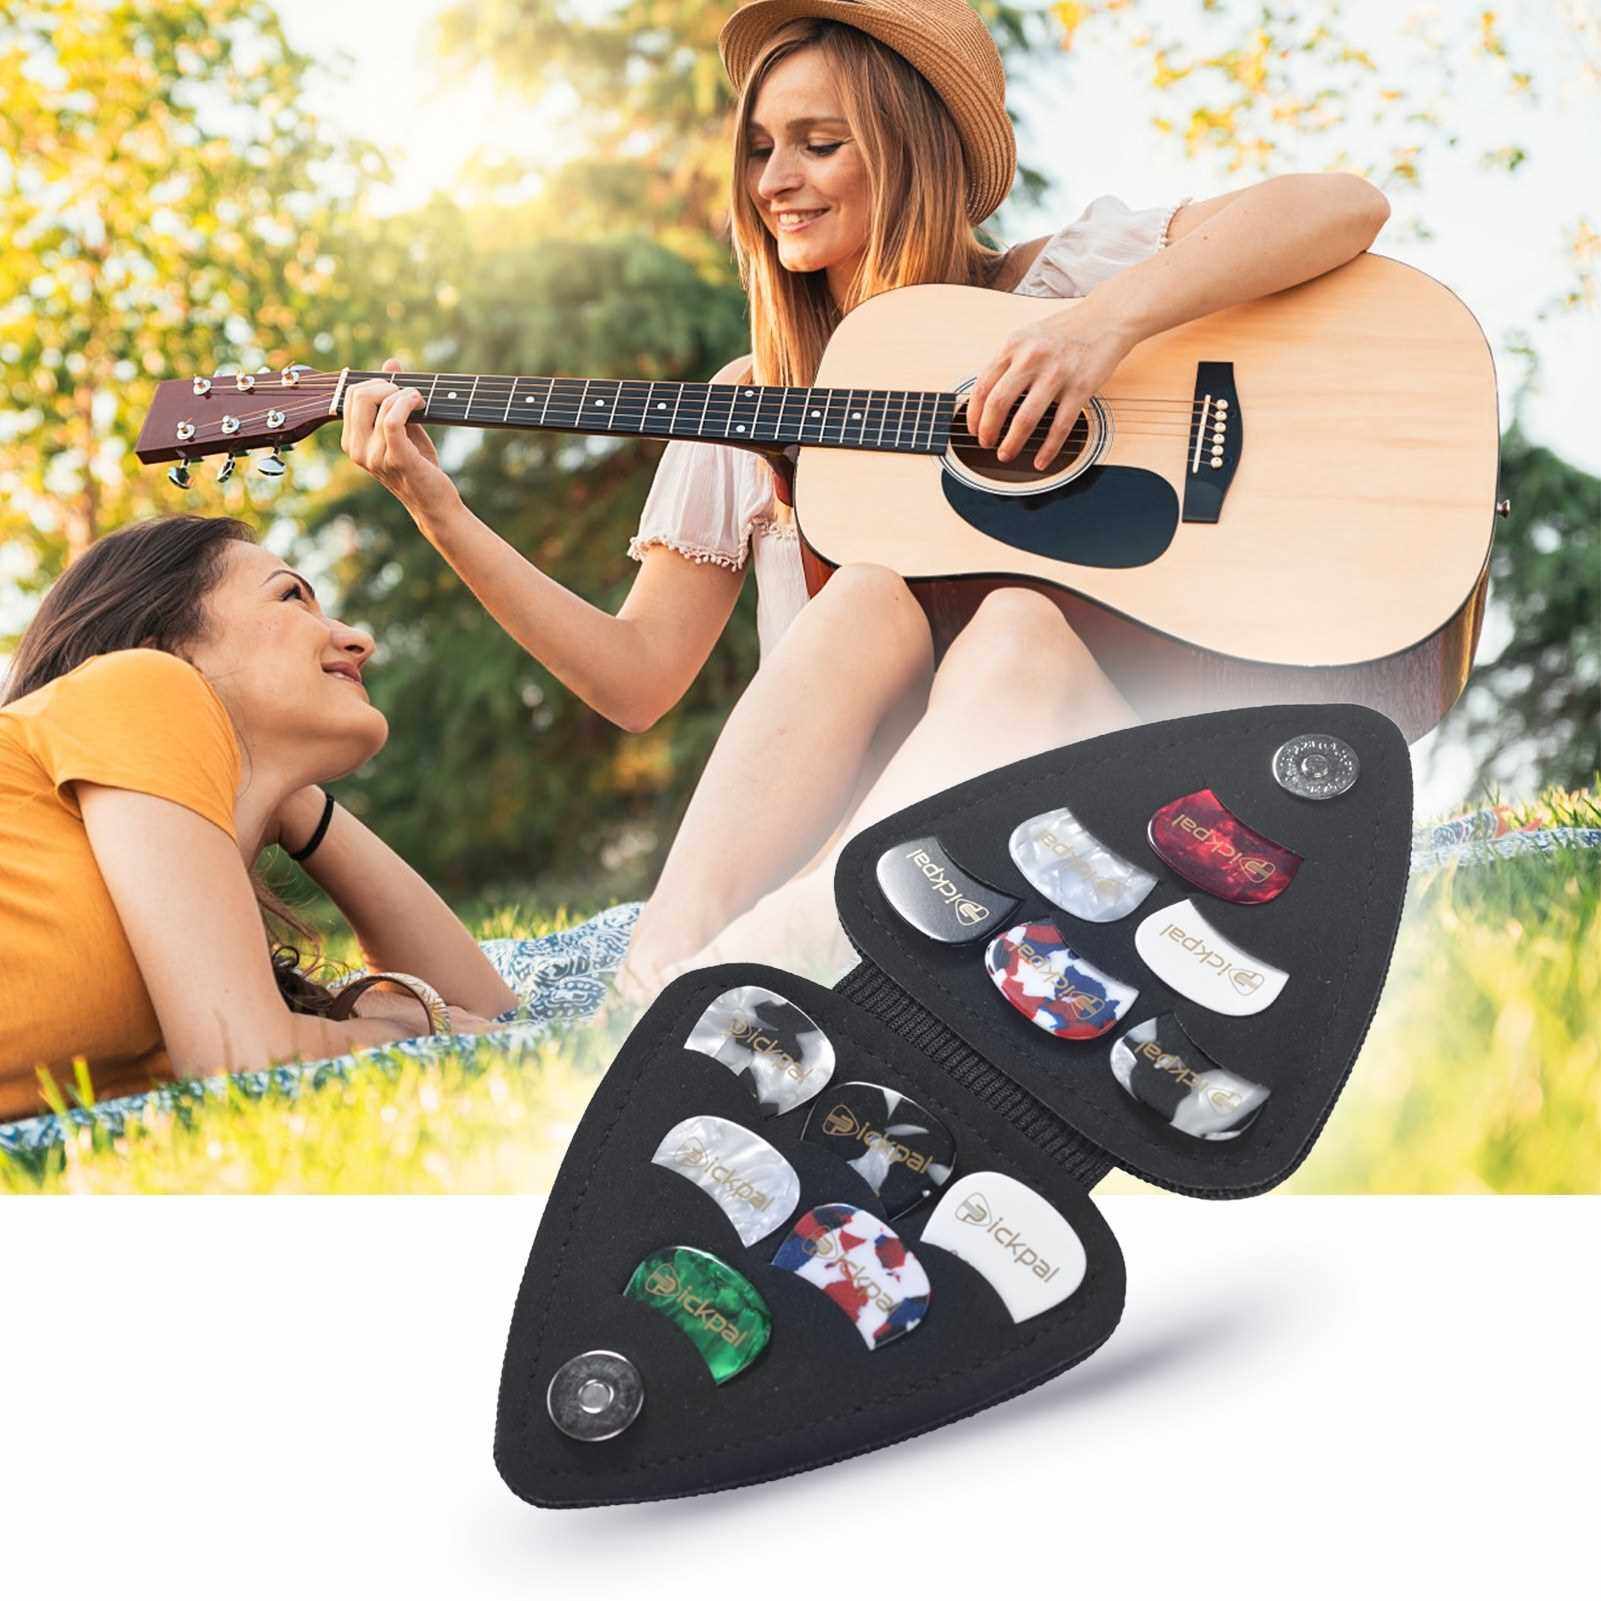 PICKPAL Guitar Picks Holder Case for Acoustic Electric Guitar Includes 12 PCS Guitar Picks Leather Guitar Plectrums Storage Pouch Guitar Pick Bag Gifts for Kids Friends Guitar Players (Standard)